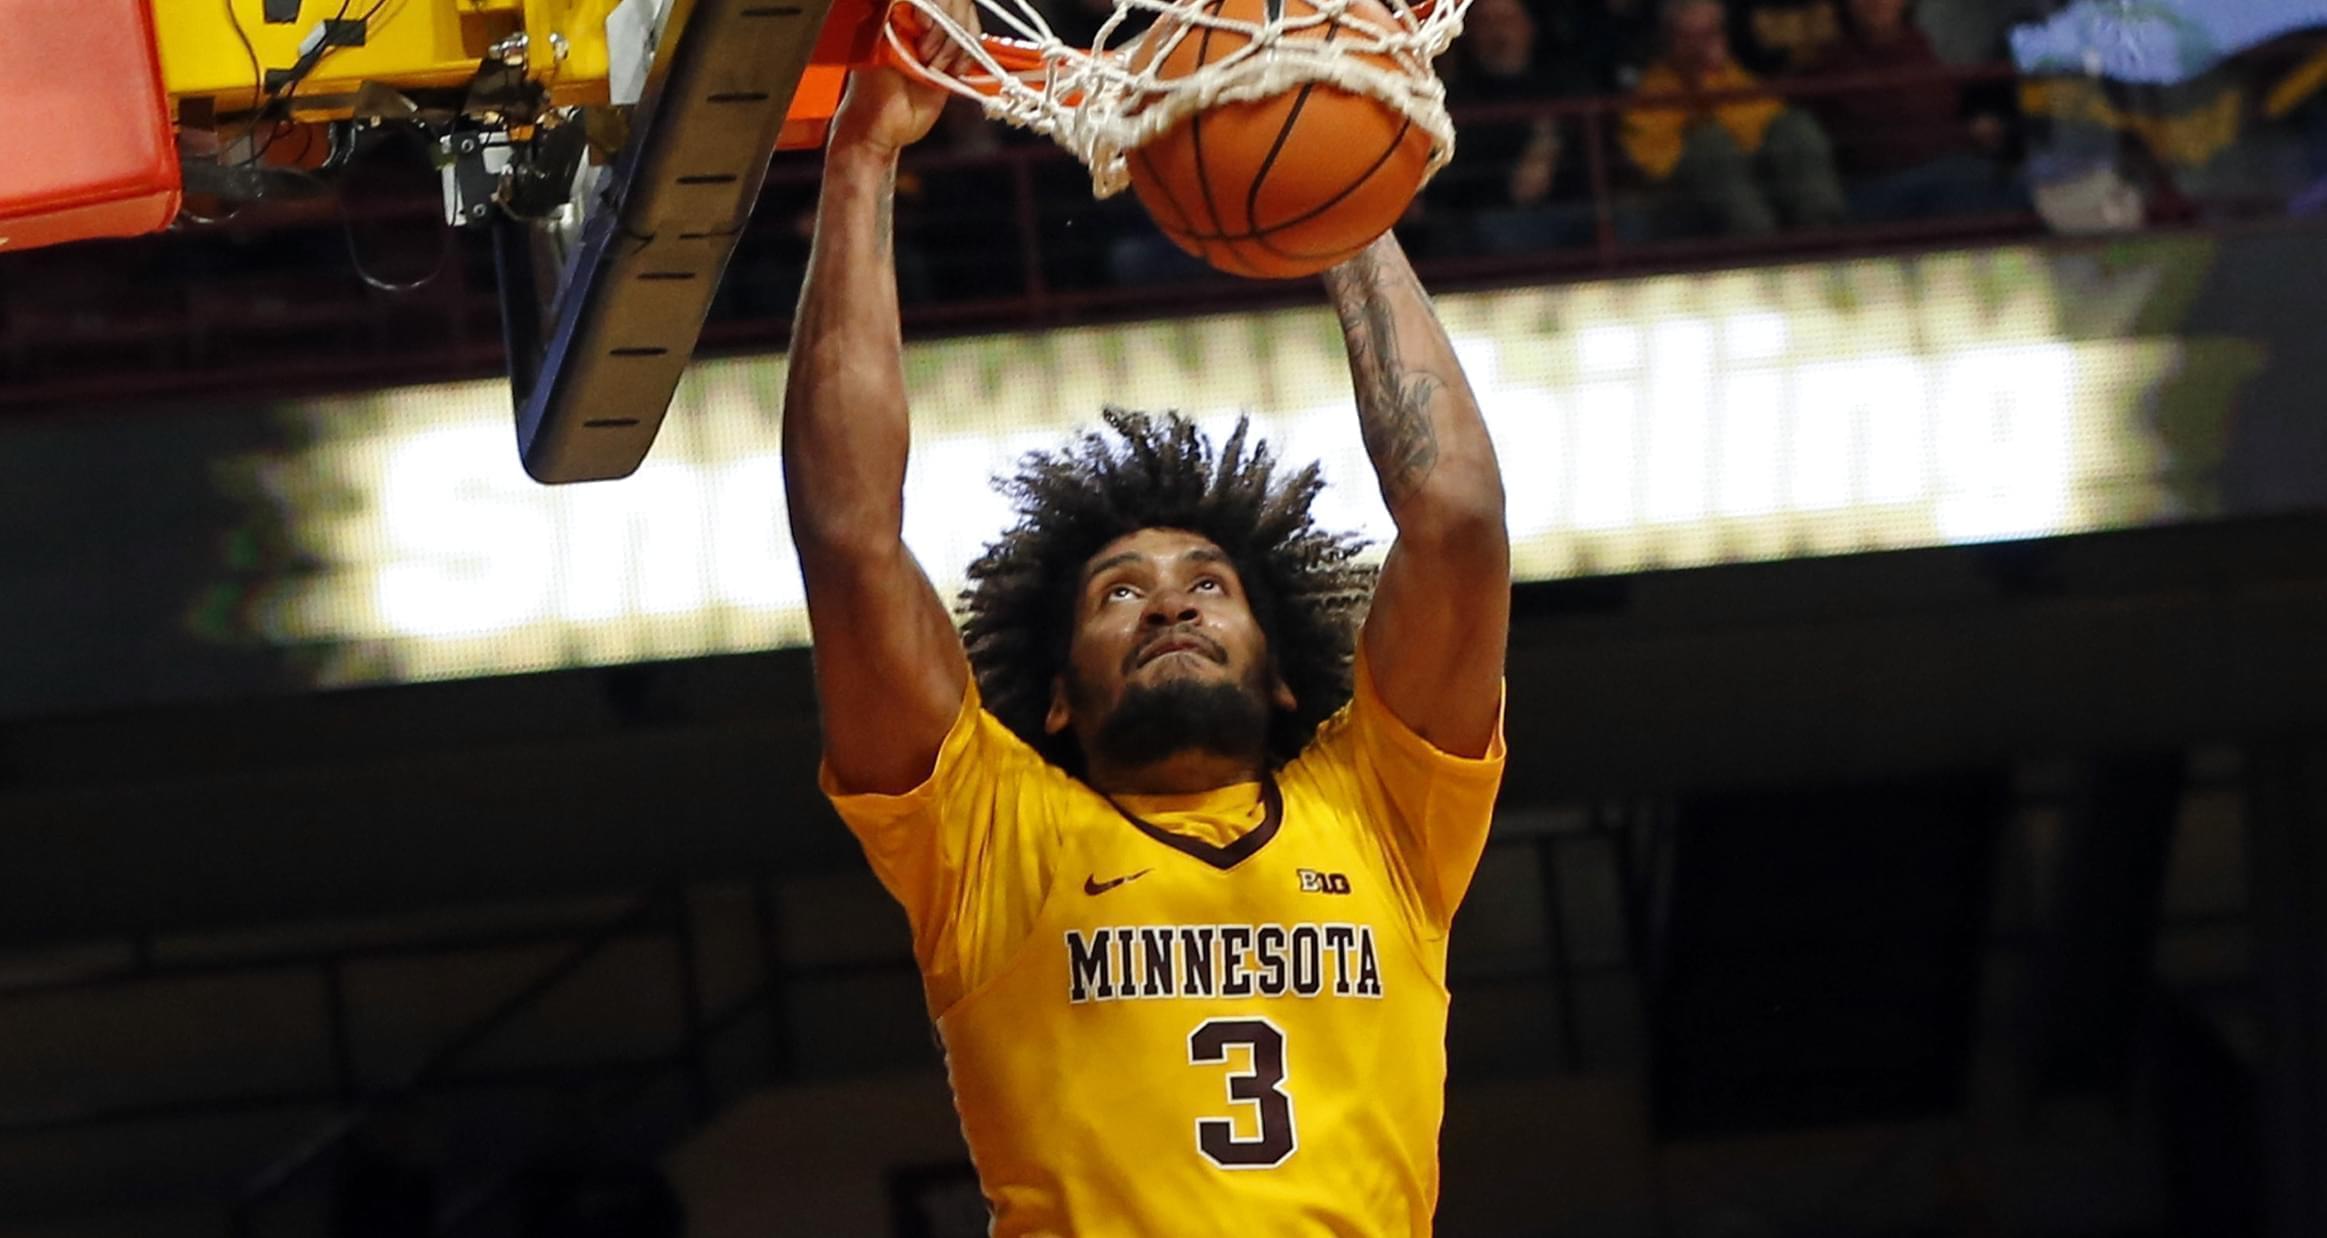 Minnesota's Jordan Murphy dunks against Illinois' in the second half of an NCAA college basketball game Wednesday, Jan. 3, 2018, in Minneapolis. 